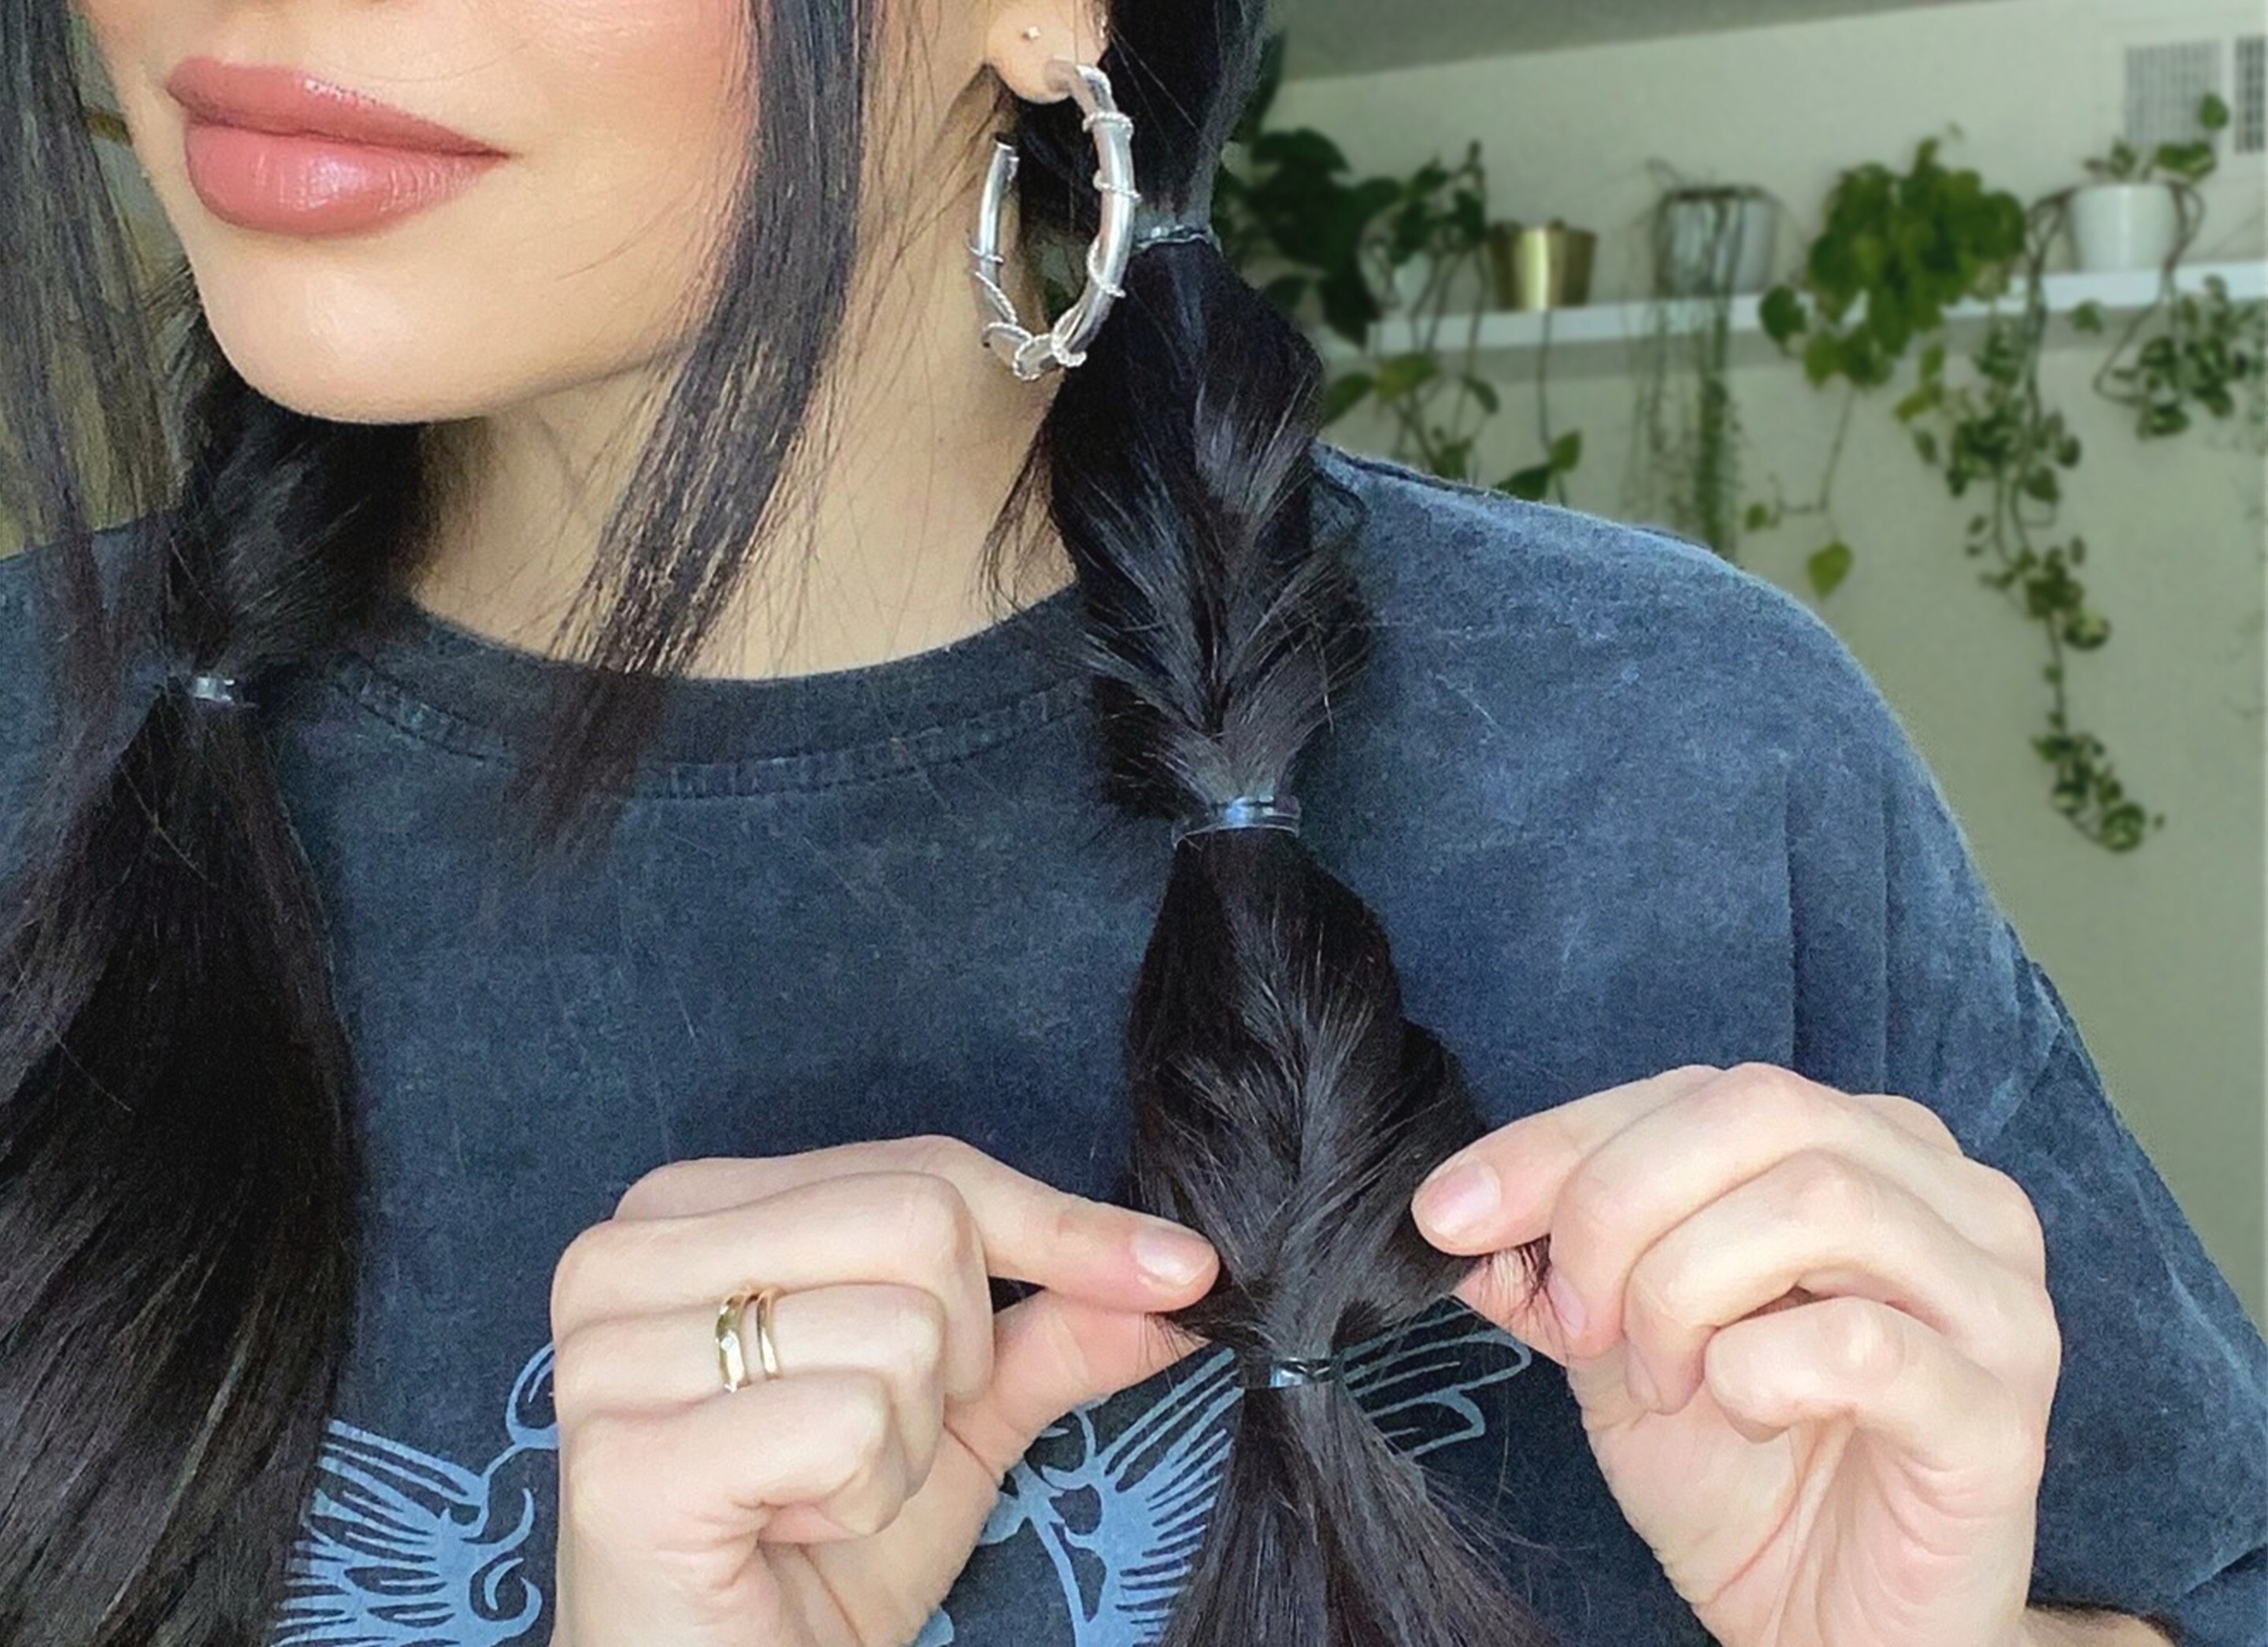 Use your fingers to loosen and pull apart the hair, then repeat through the remaining length of the ponytails.